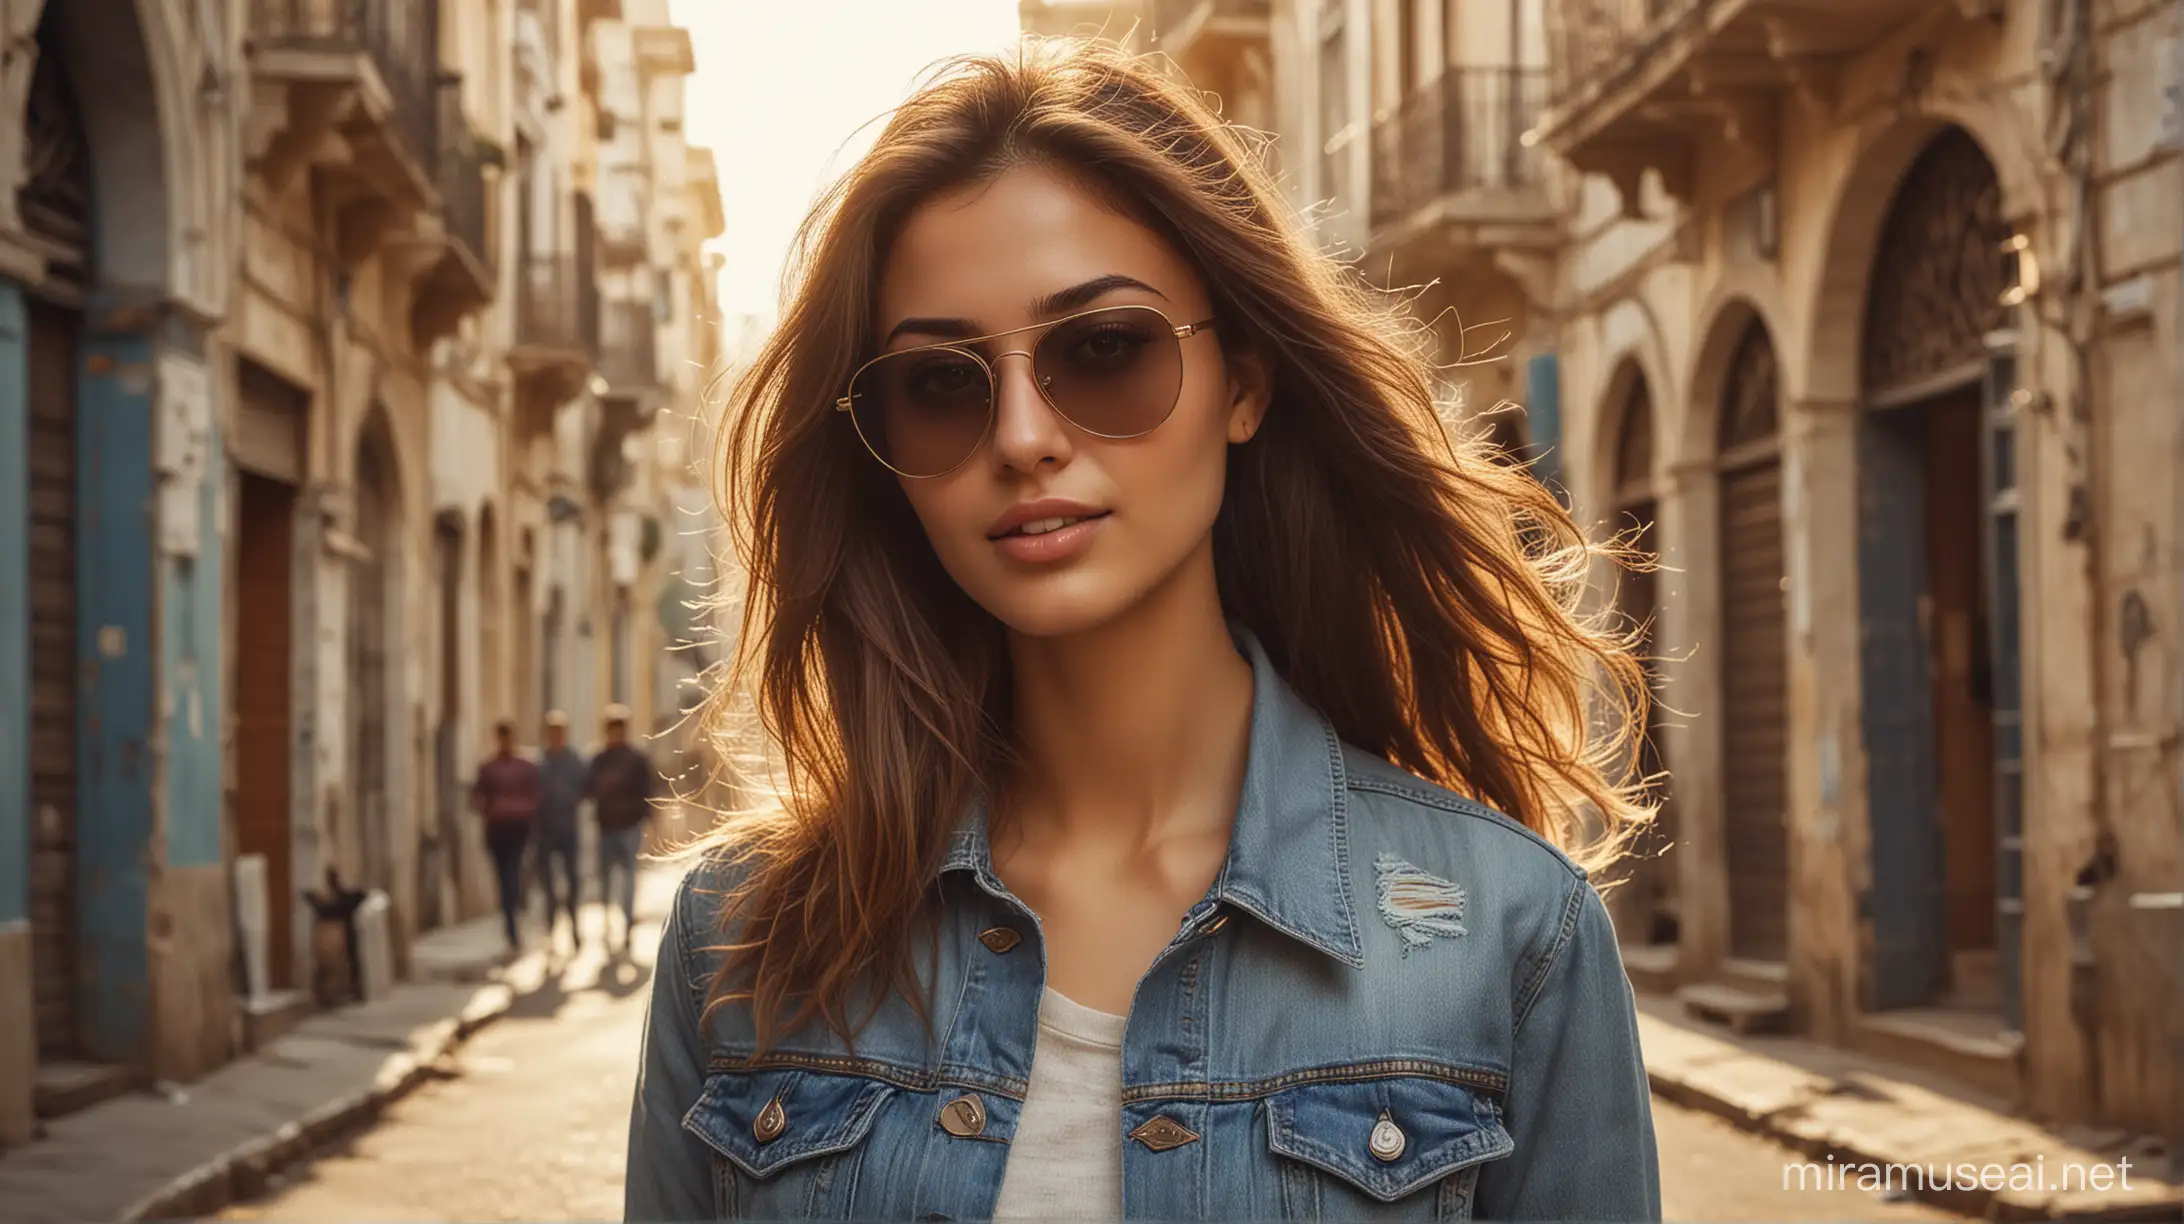 " photorealistic portrait of a 25-year-old brunette Algerian girl full body with long, flowing light brown hair and striking hazel eyes, wearing sunglasses and a Vintage-inspired denim: Retro washes, distressed details, and high-waisted silhouettes are making a comeback., set in Algiers Center. She should have a natural, approachable expression and be illuminated by soft, golden-hour sunlight. The background should depict a scenic outdoor setting, perhaps the bustling streets of Algiers with its iconic architecture. Capture this image with a high-resolution photograph using an 85mm lens for a flattering perspective, amidst the vibrant energy of the city center with a group of people passing by."